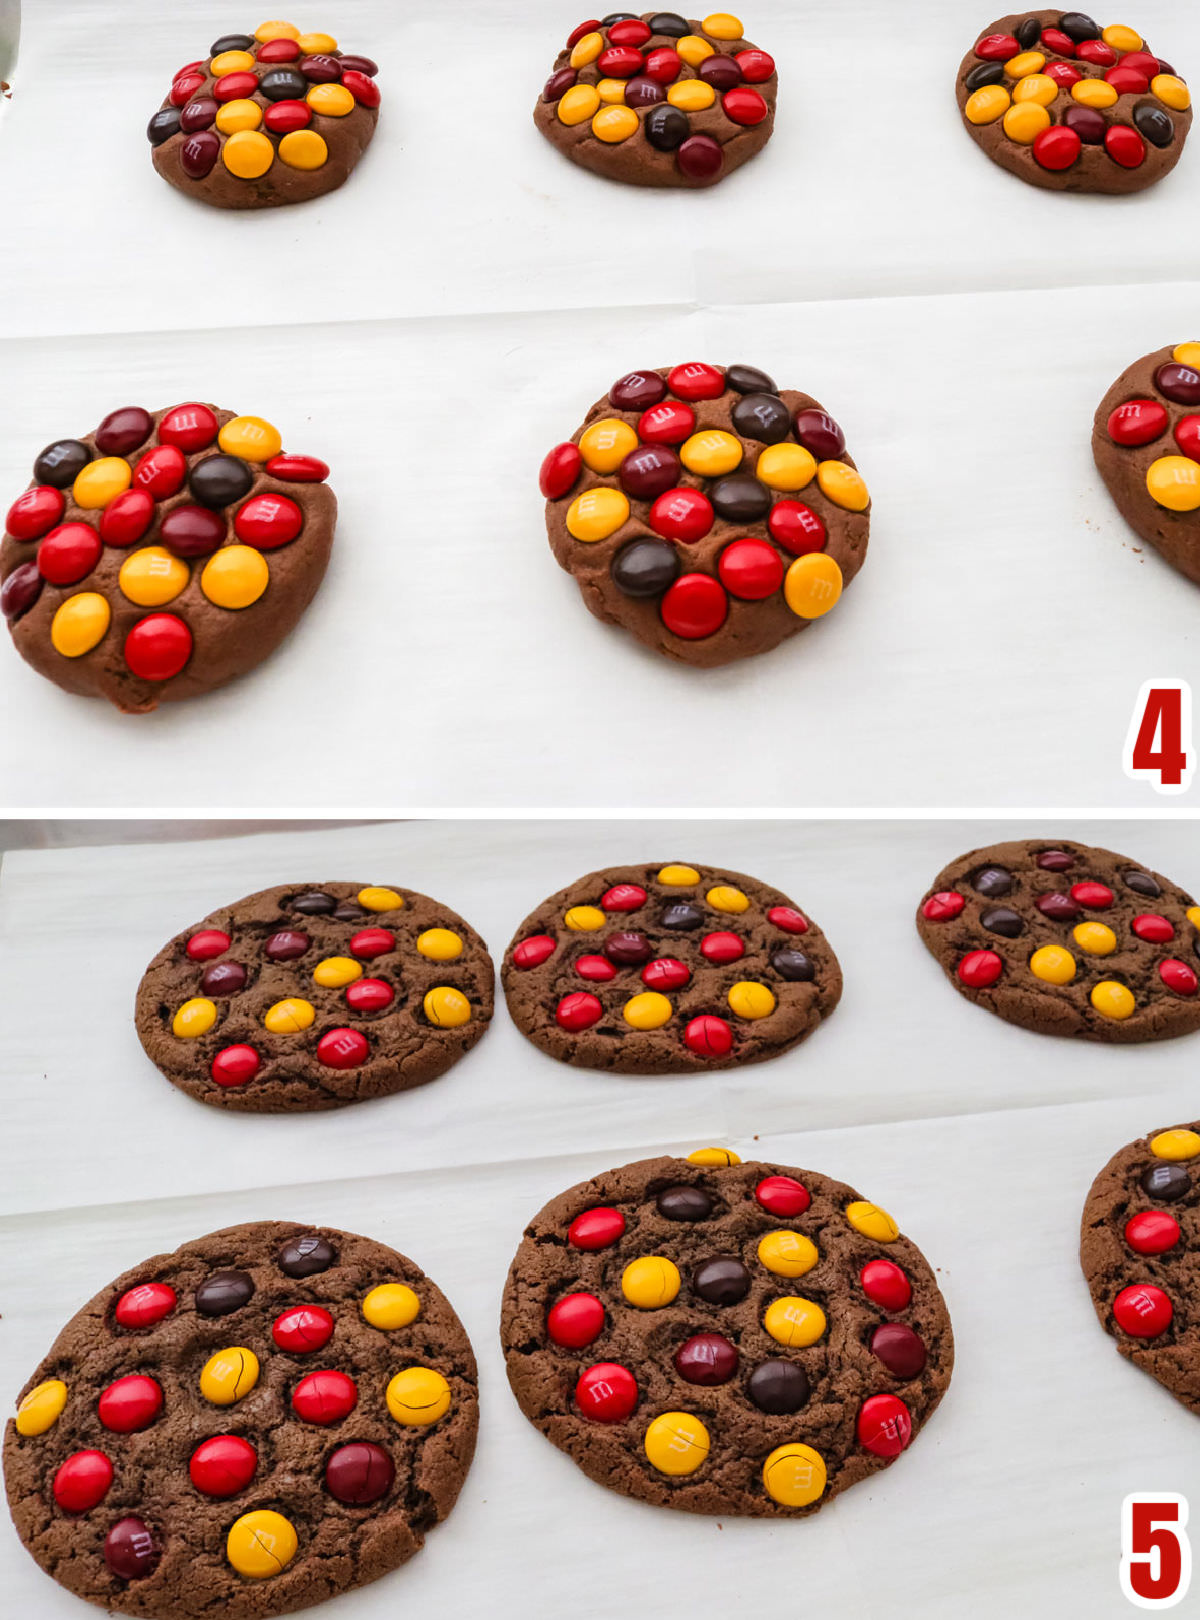 Collage image showing the steps for baking the chocolate cookies.